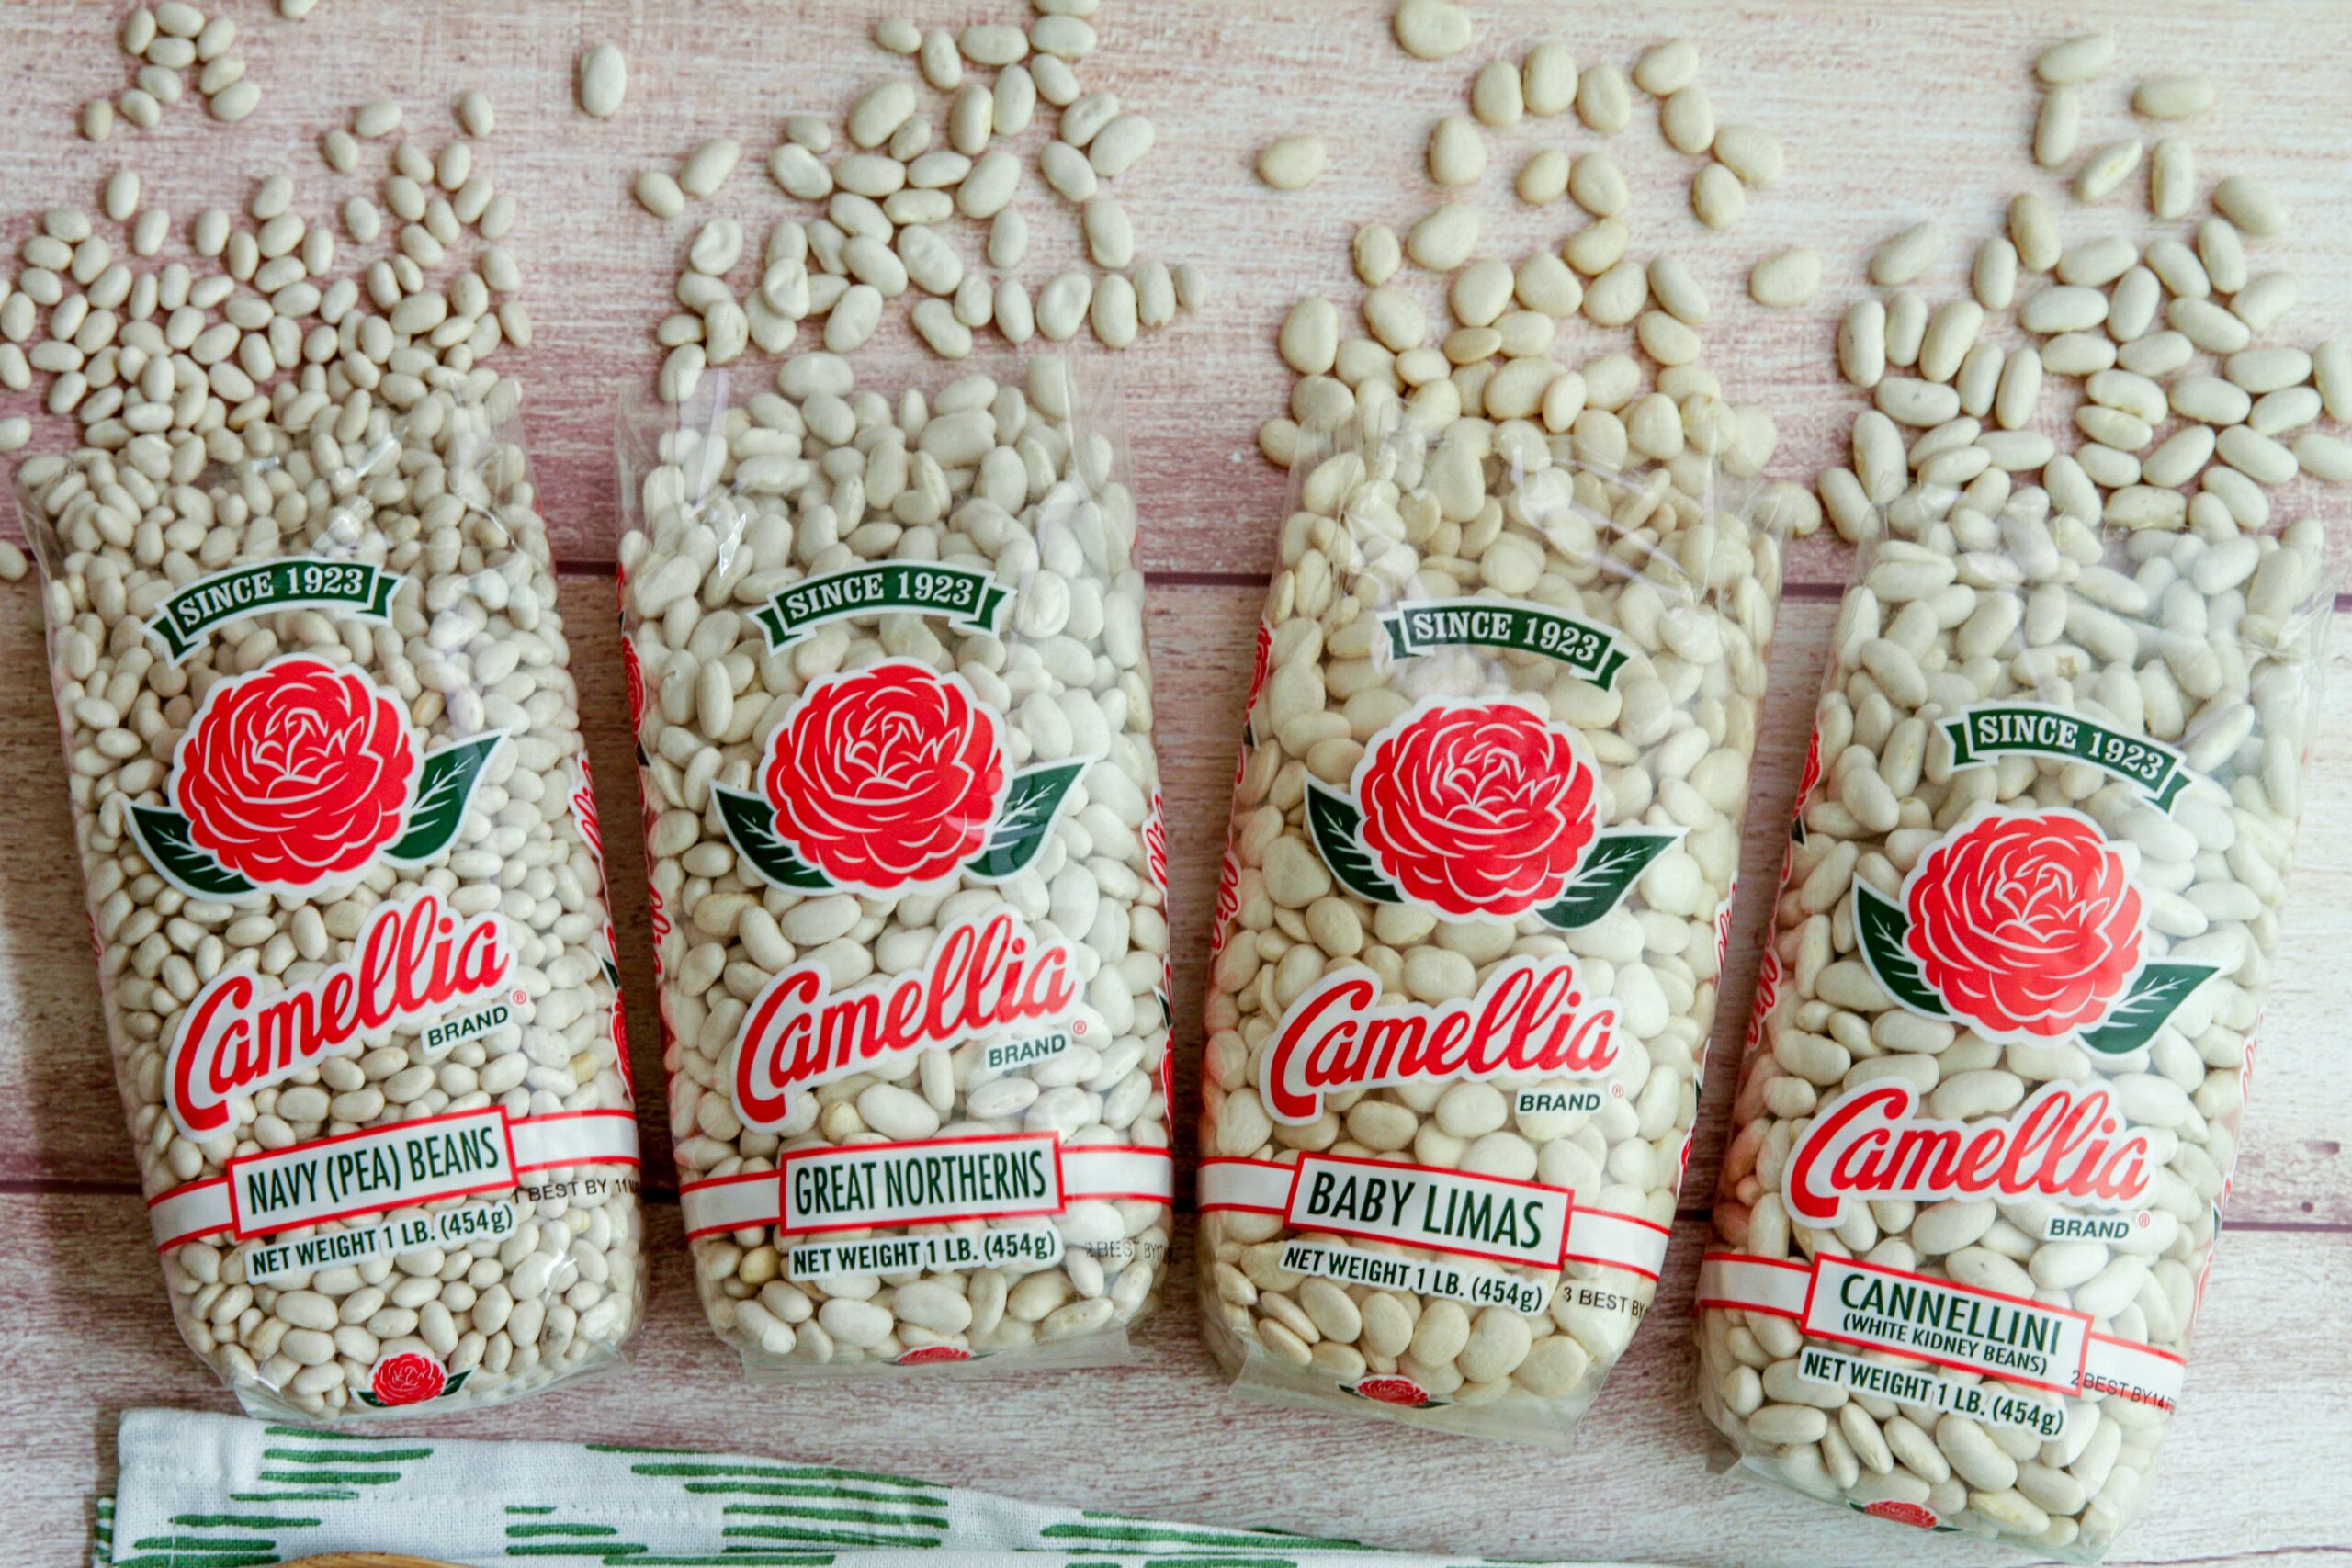 https://www.camelliabrand.com/static/wp-content/uploads/2016/11/Camellia-Brand-White-Beans-scaled.jpeg